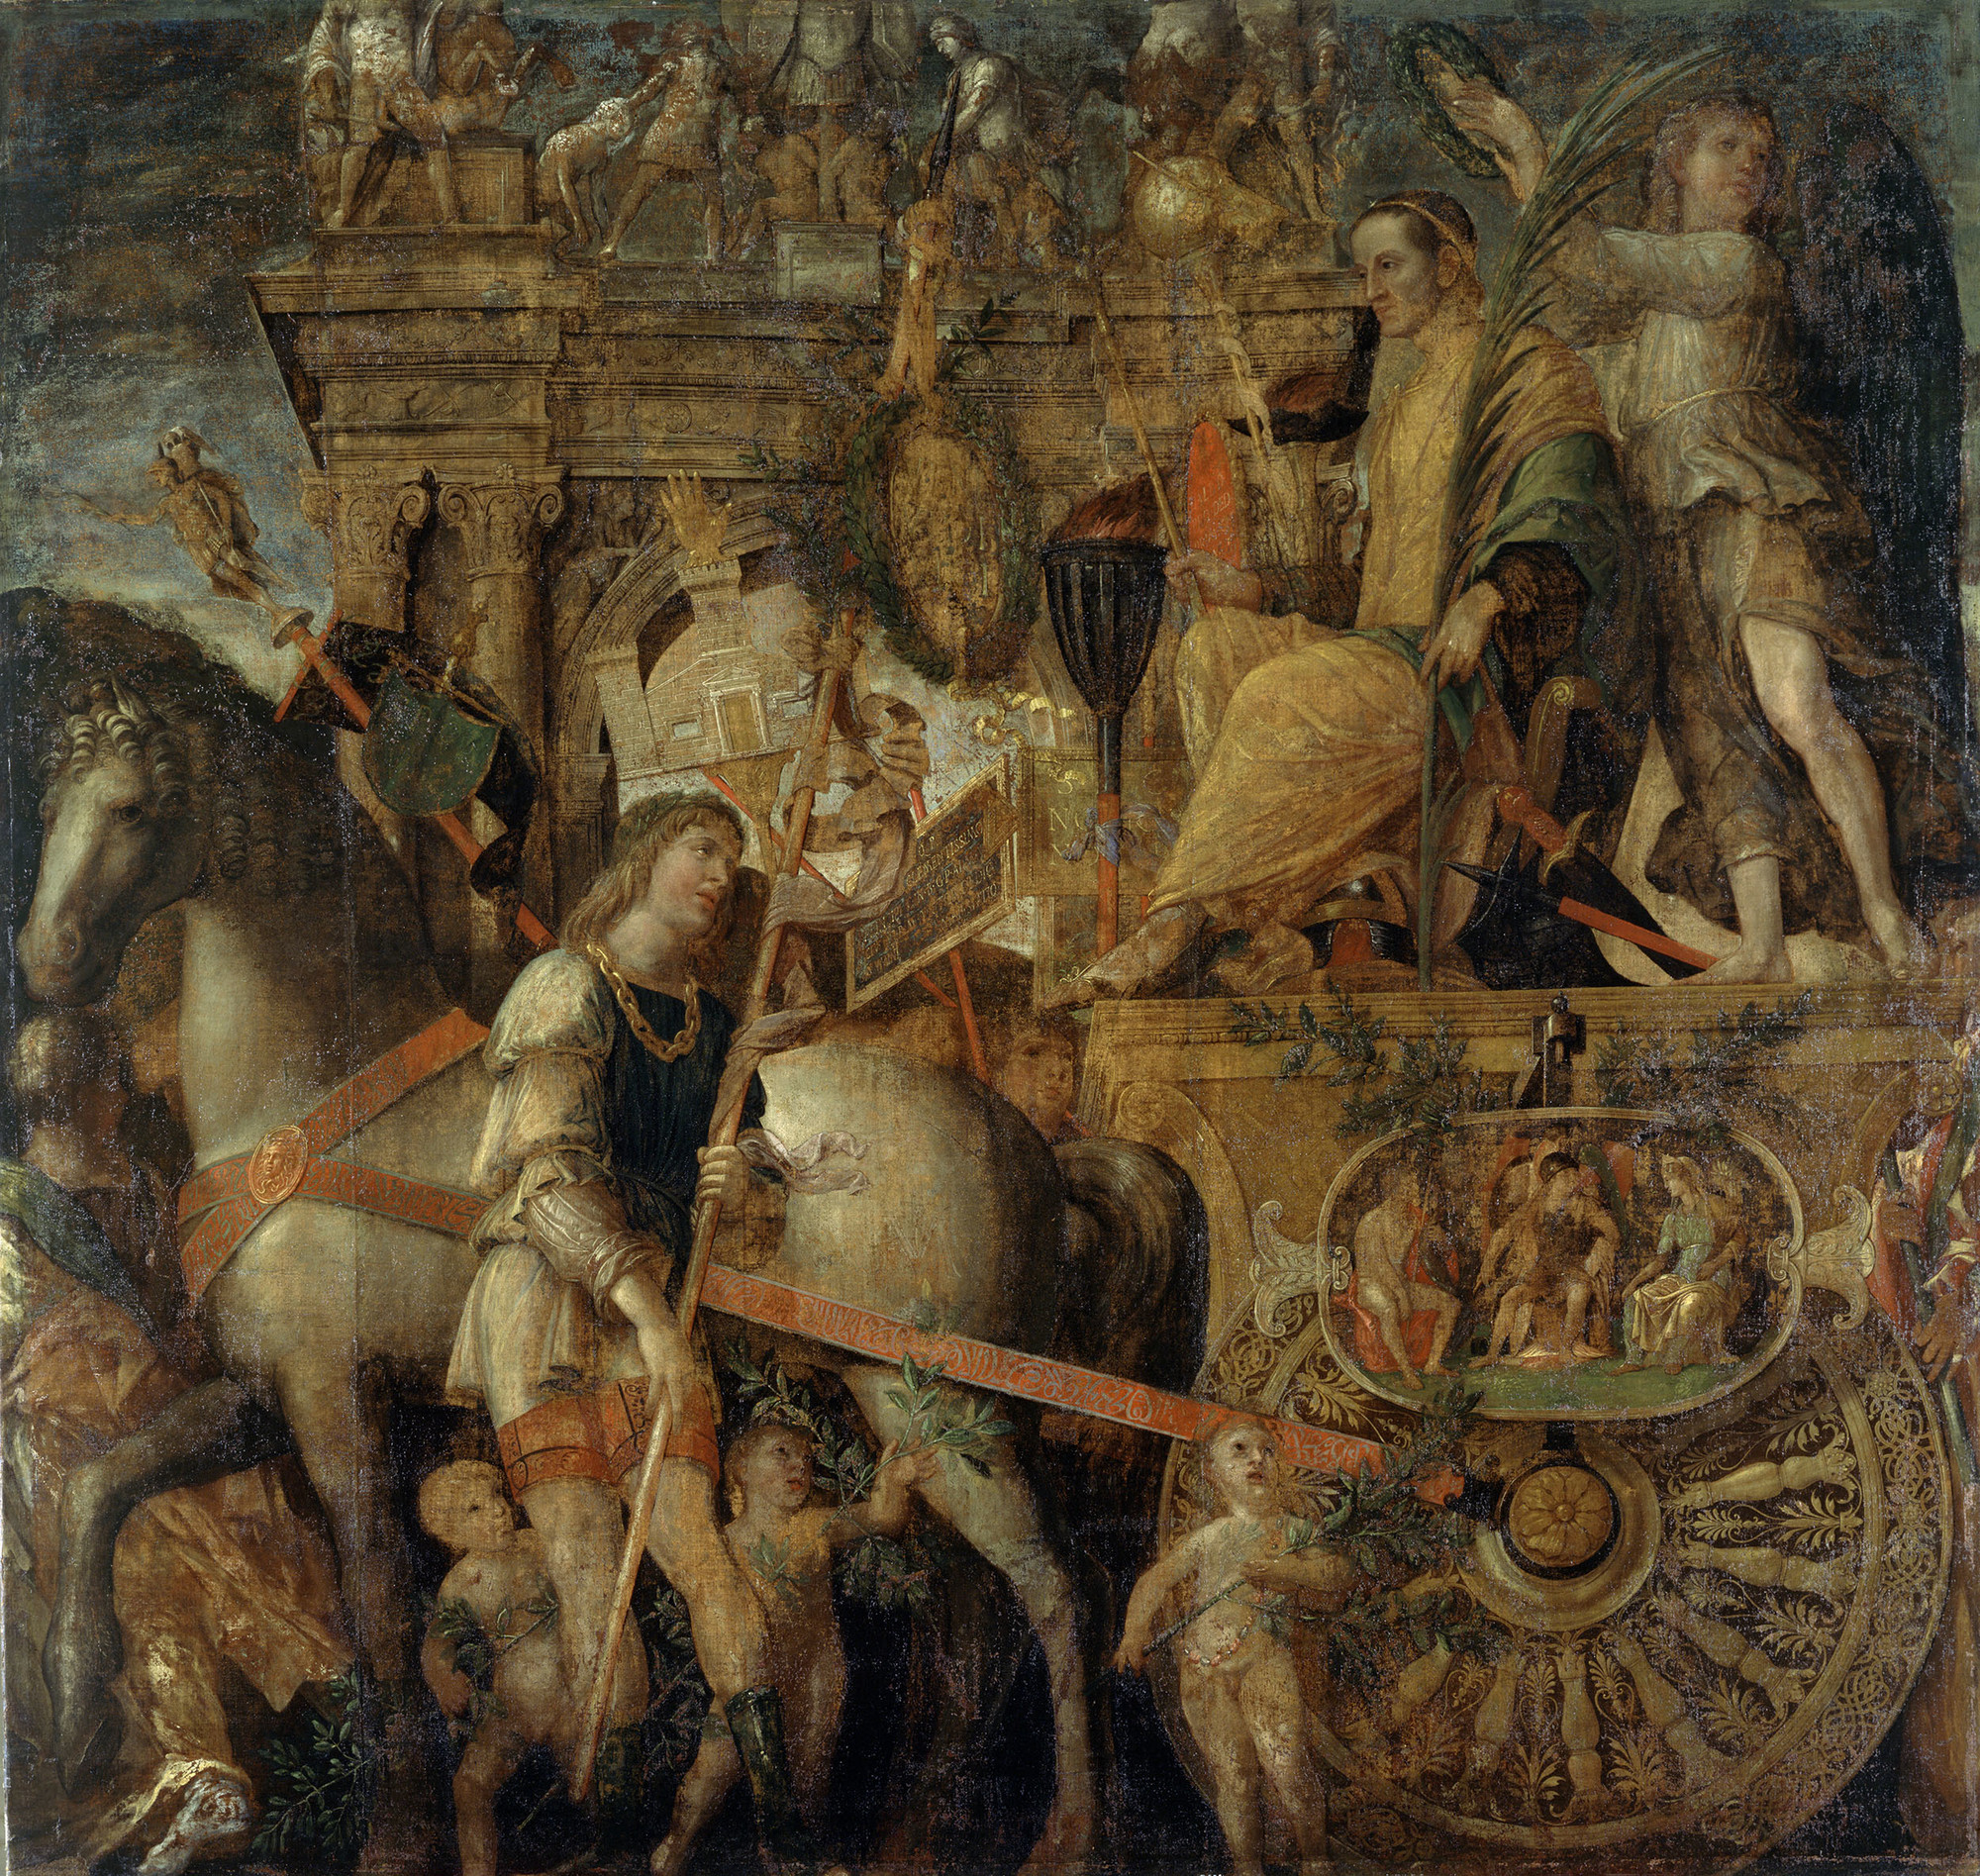 Andrea Mantegna, The Triumphs of Caesar: 9. Caesar on his Chariot, c.1484-92, tempera on canvas, 270.4 x 280.7 x 4 cm (Royal Collection Trust, Hampton Court Palace, London)